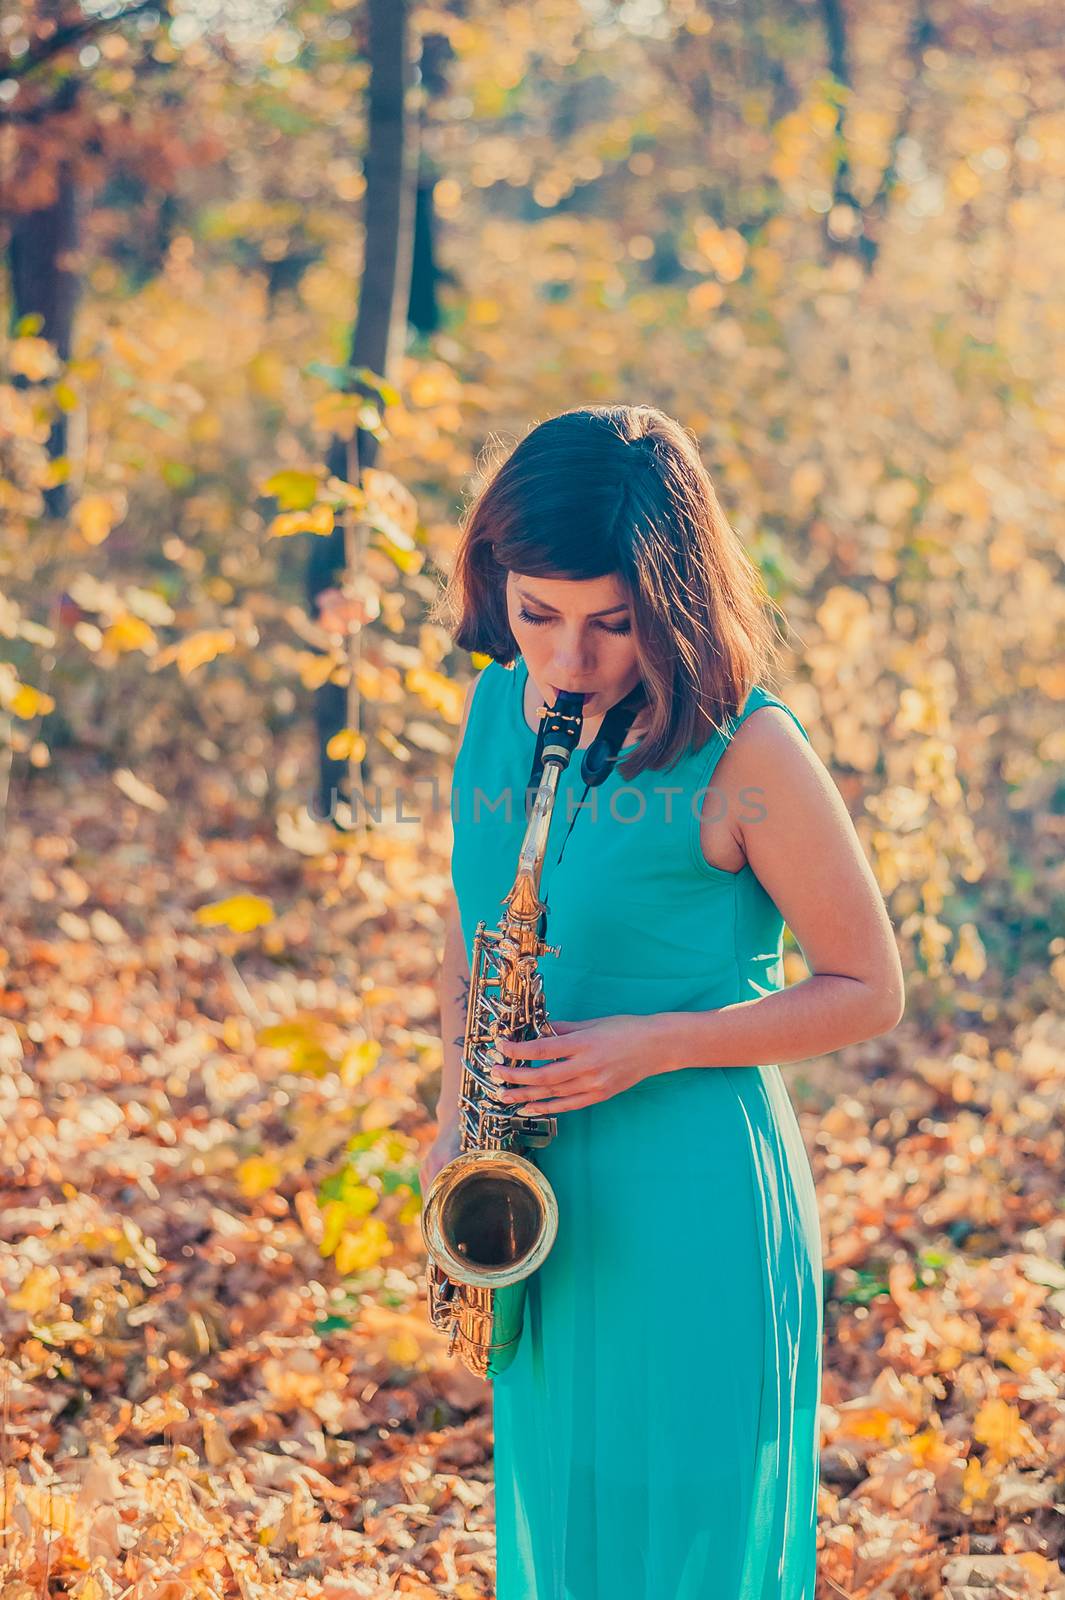 tender young girl with dark hair in a beautiful long blue dress plays the alto saxophone in a yellow autumn park by chernobrovin